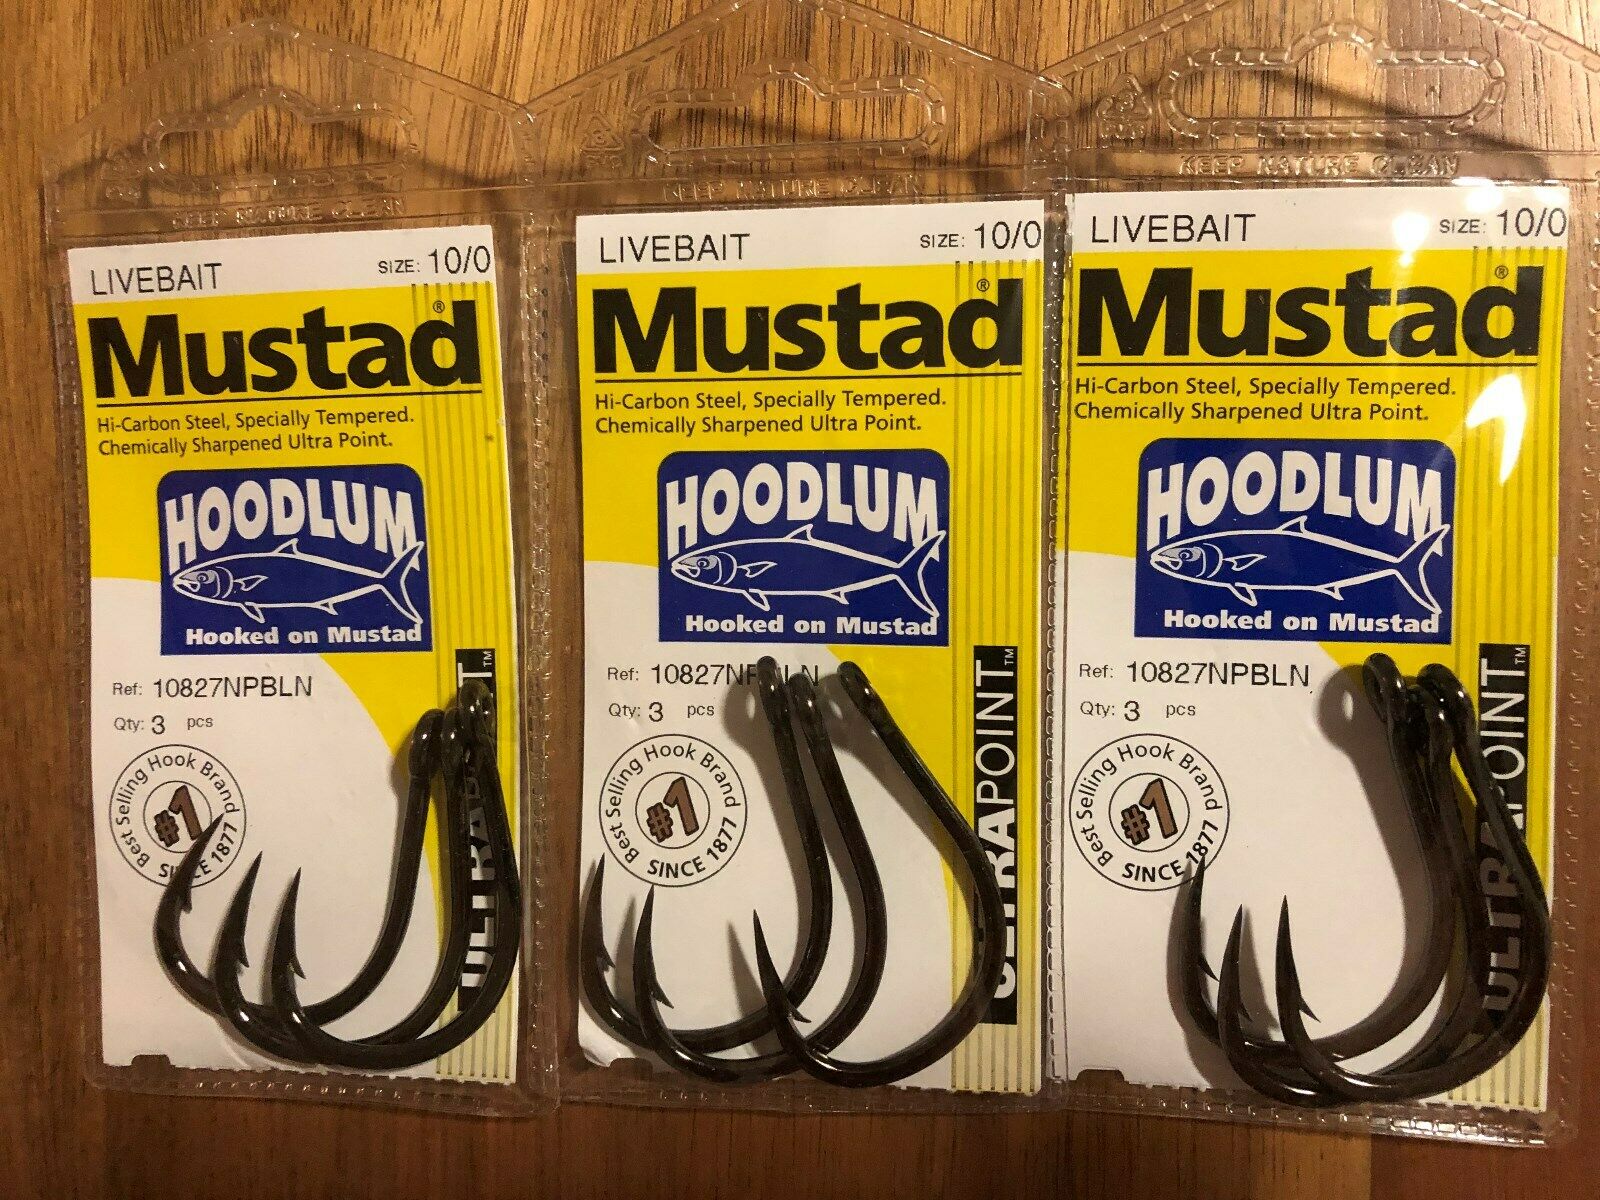 3 Packs of Mustad 10827NPBLN Hoodlum Live Bait 4x Super Strong Fishing –  Tight Lines Affordable Fishing Tackle